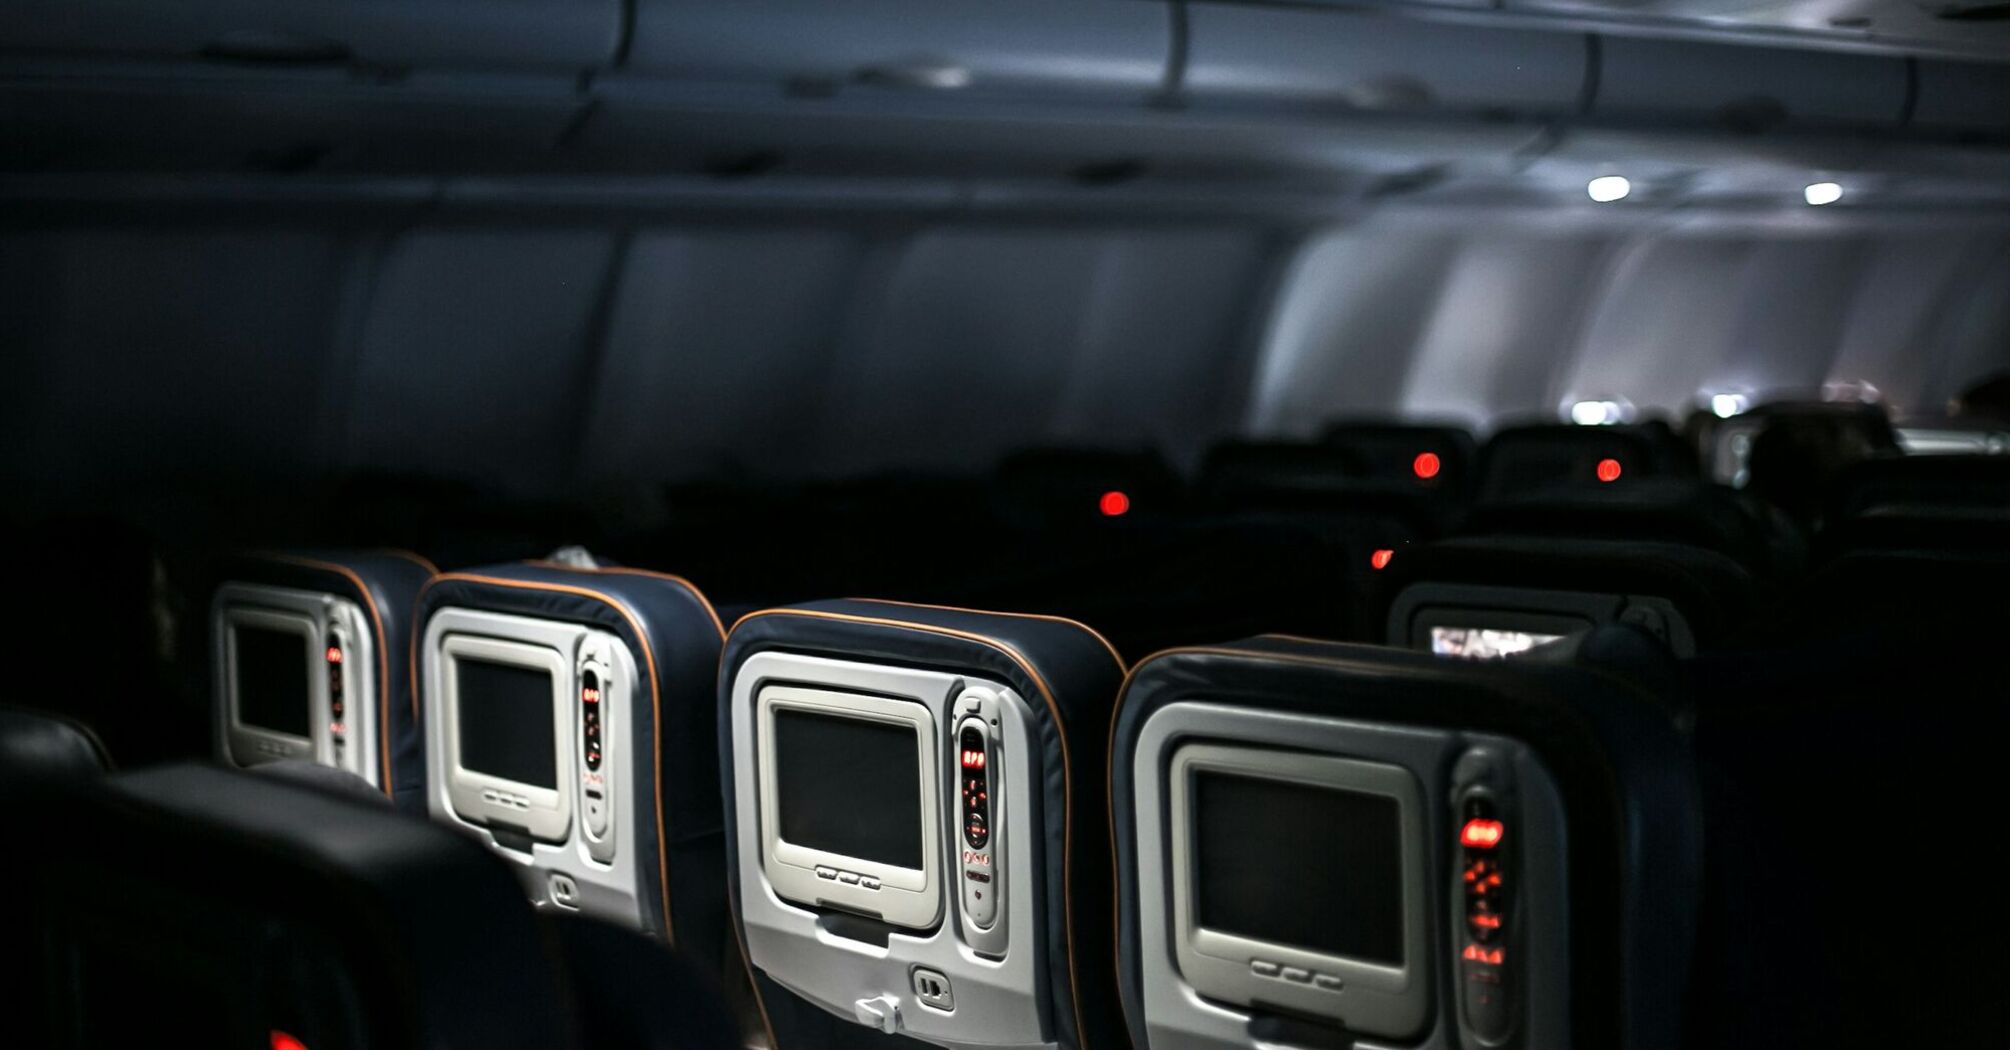 Interior view of an airplane cabin showing rows of seatback entertainment screens in dim lighting